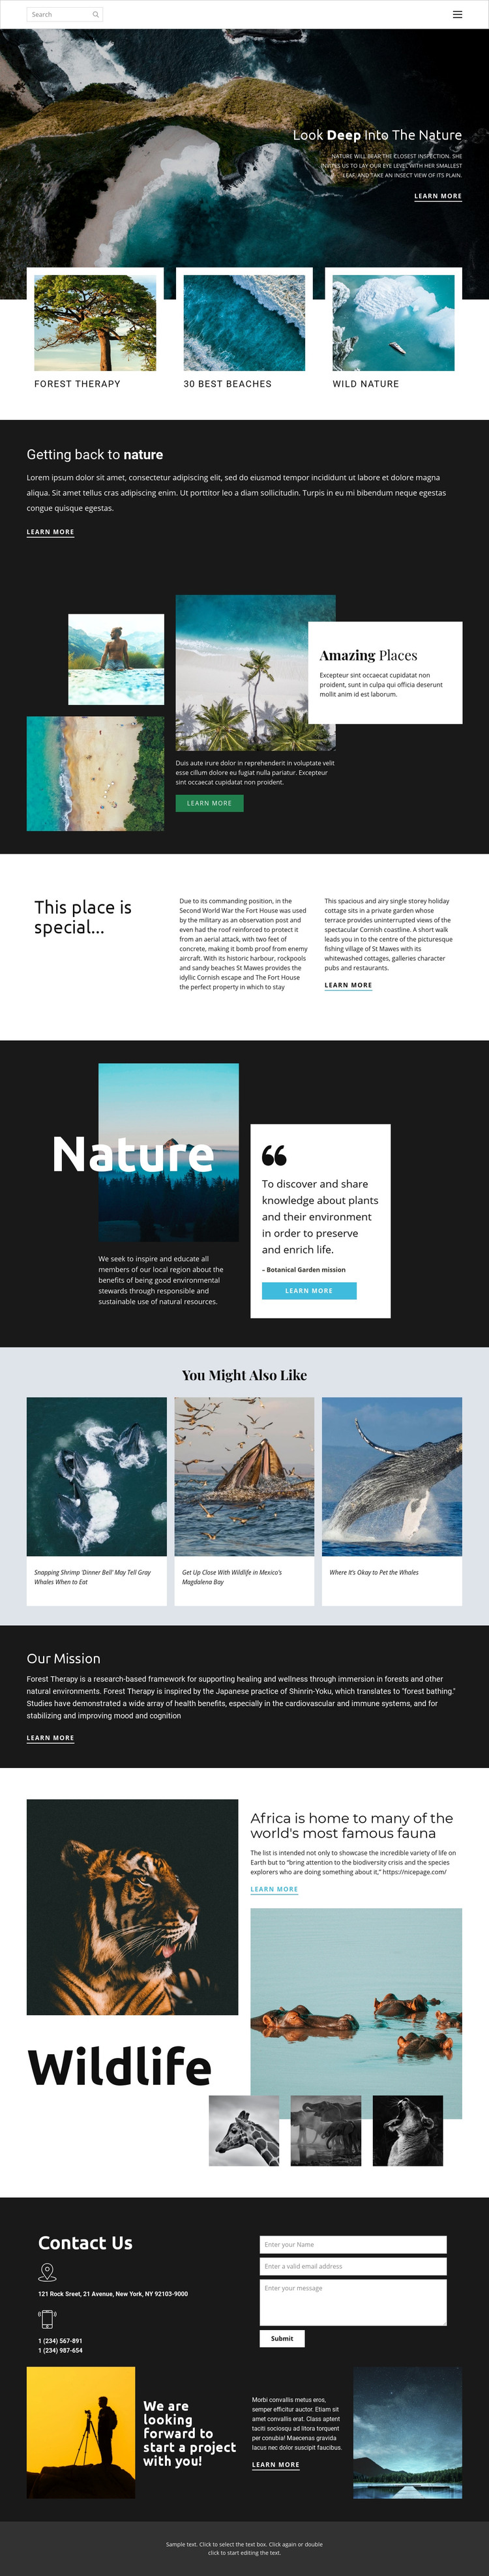 Exploring wildlife and nature Homepage Design